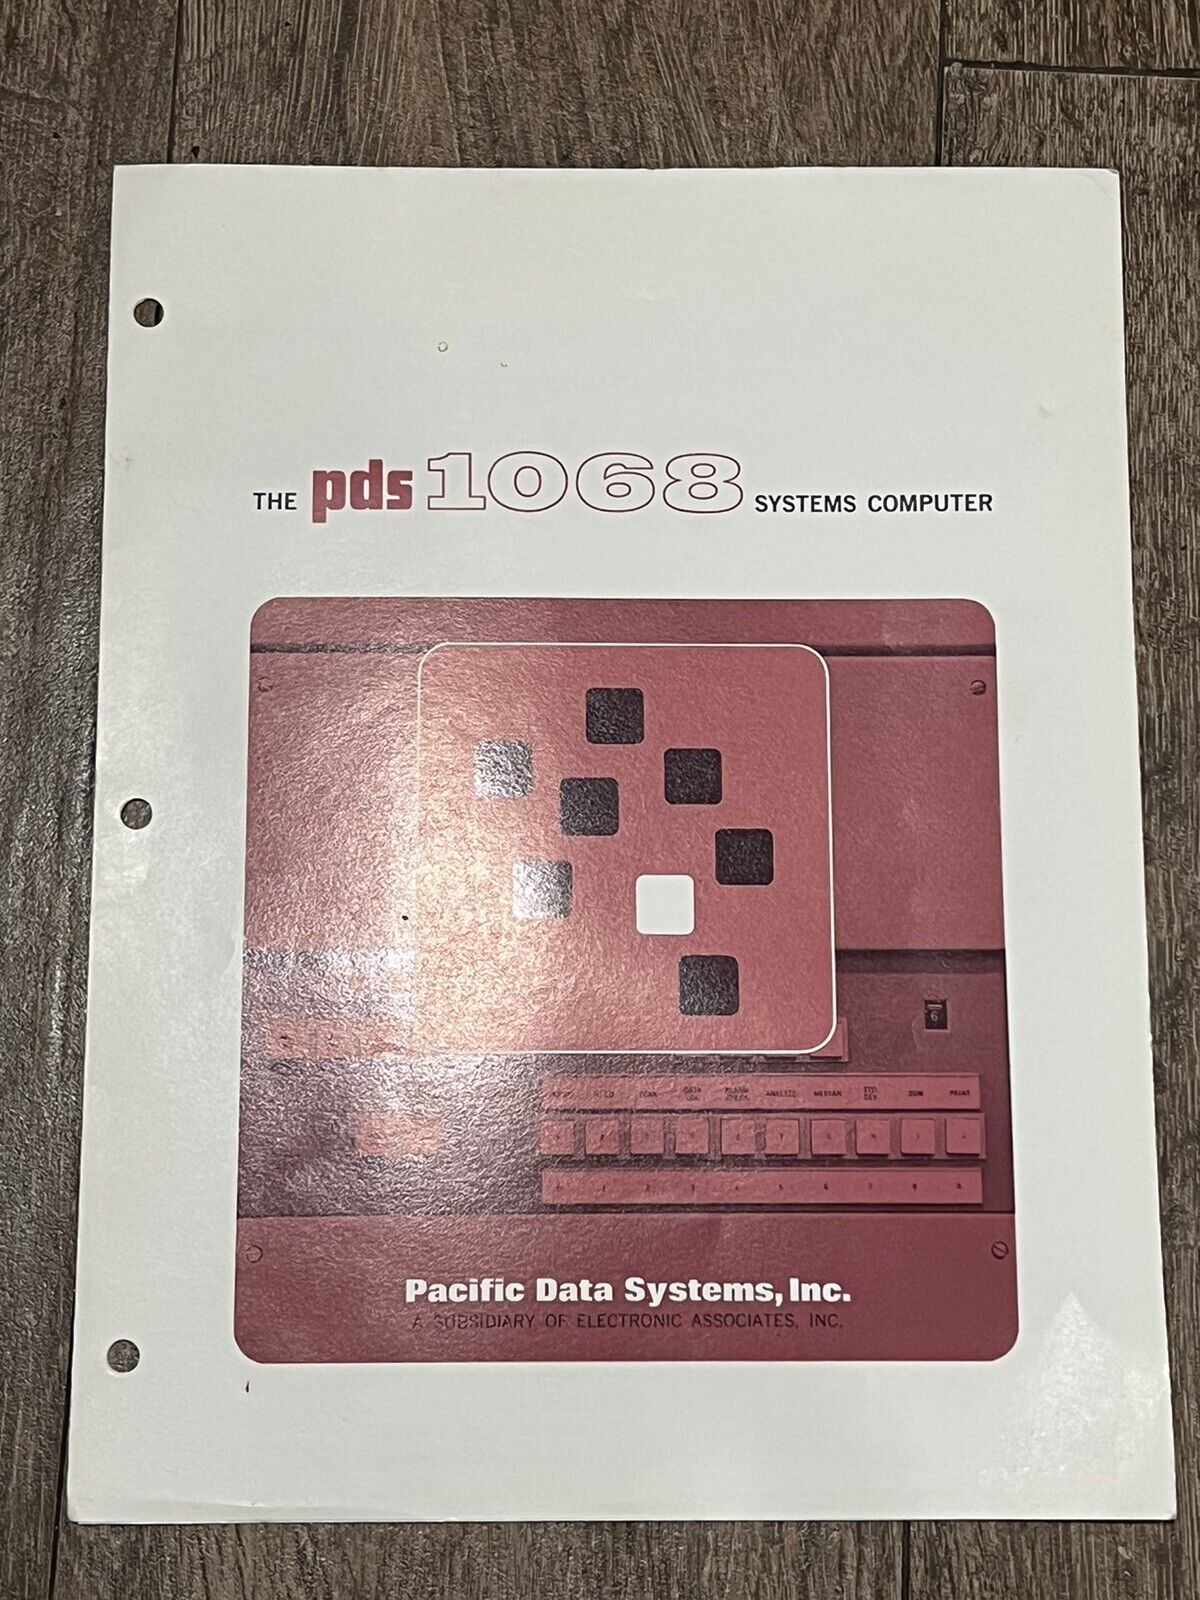 RARE Vintage 1964 Pacific Data Systems PDS 1068 Computer Brochure